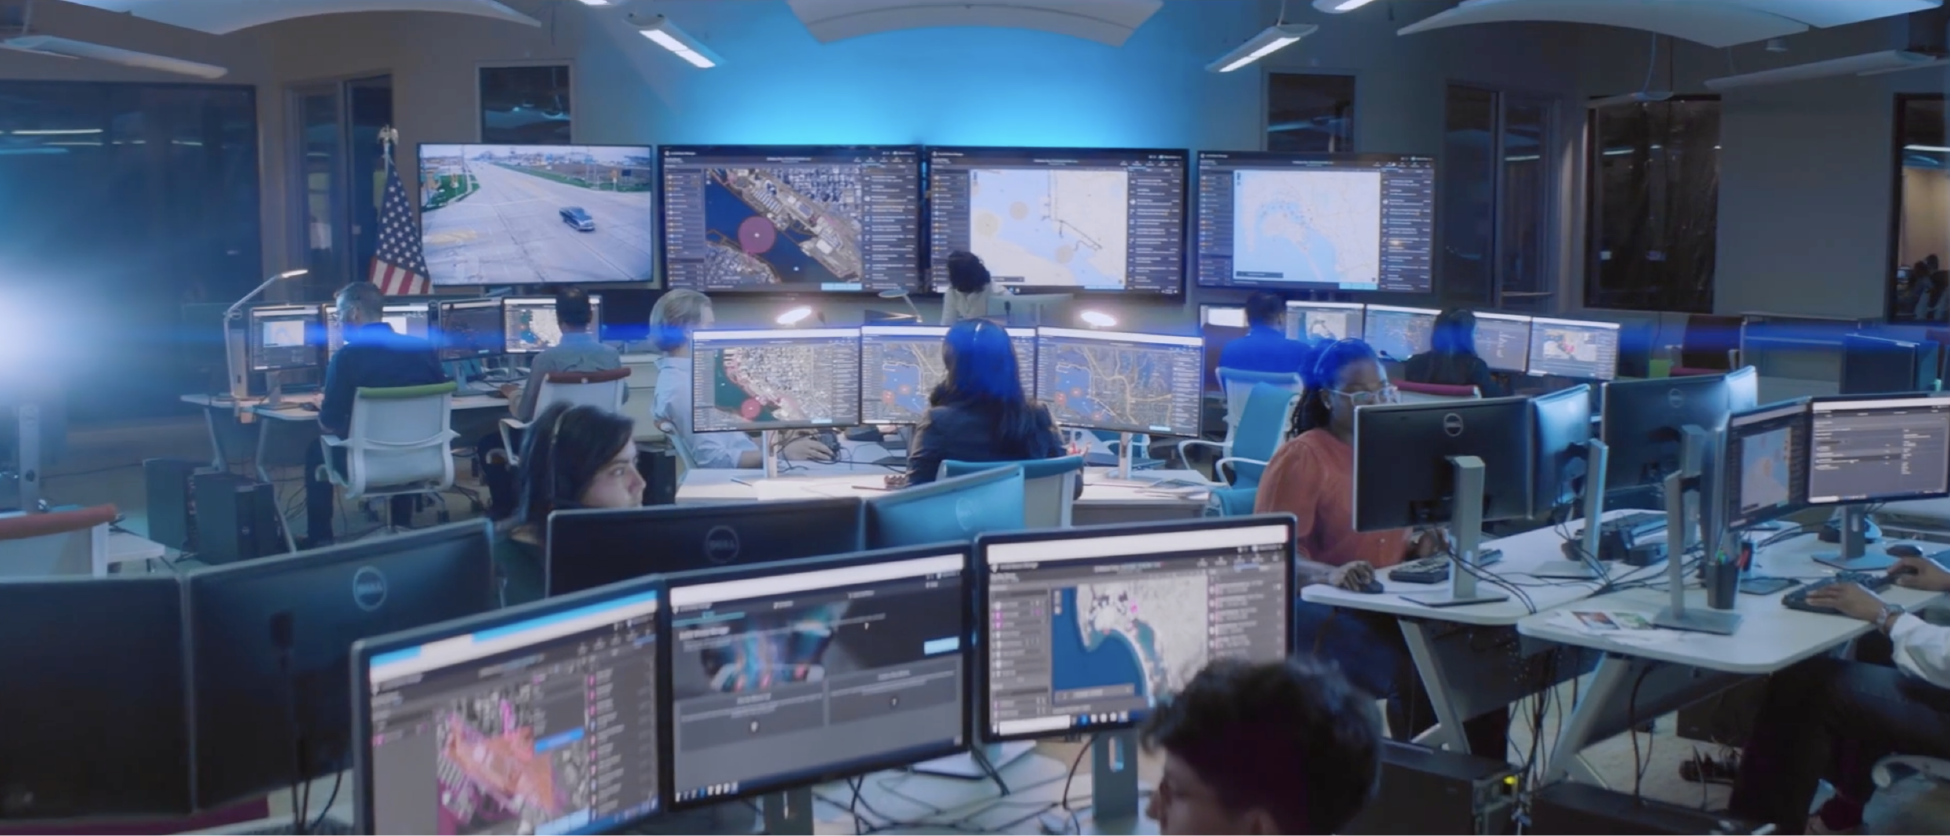 A blue-lit mission control room lined with large monitors displaying map dashboard data; and many people wearing headsets and sitting at computer stations